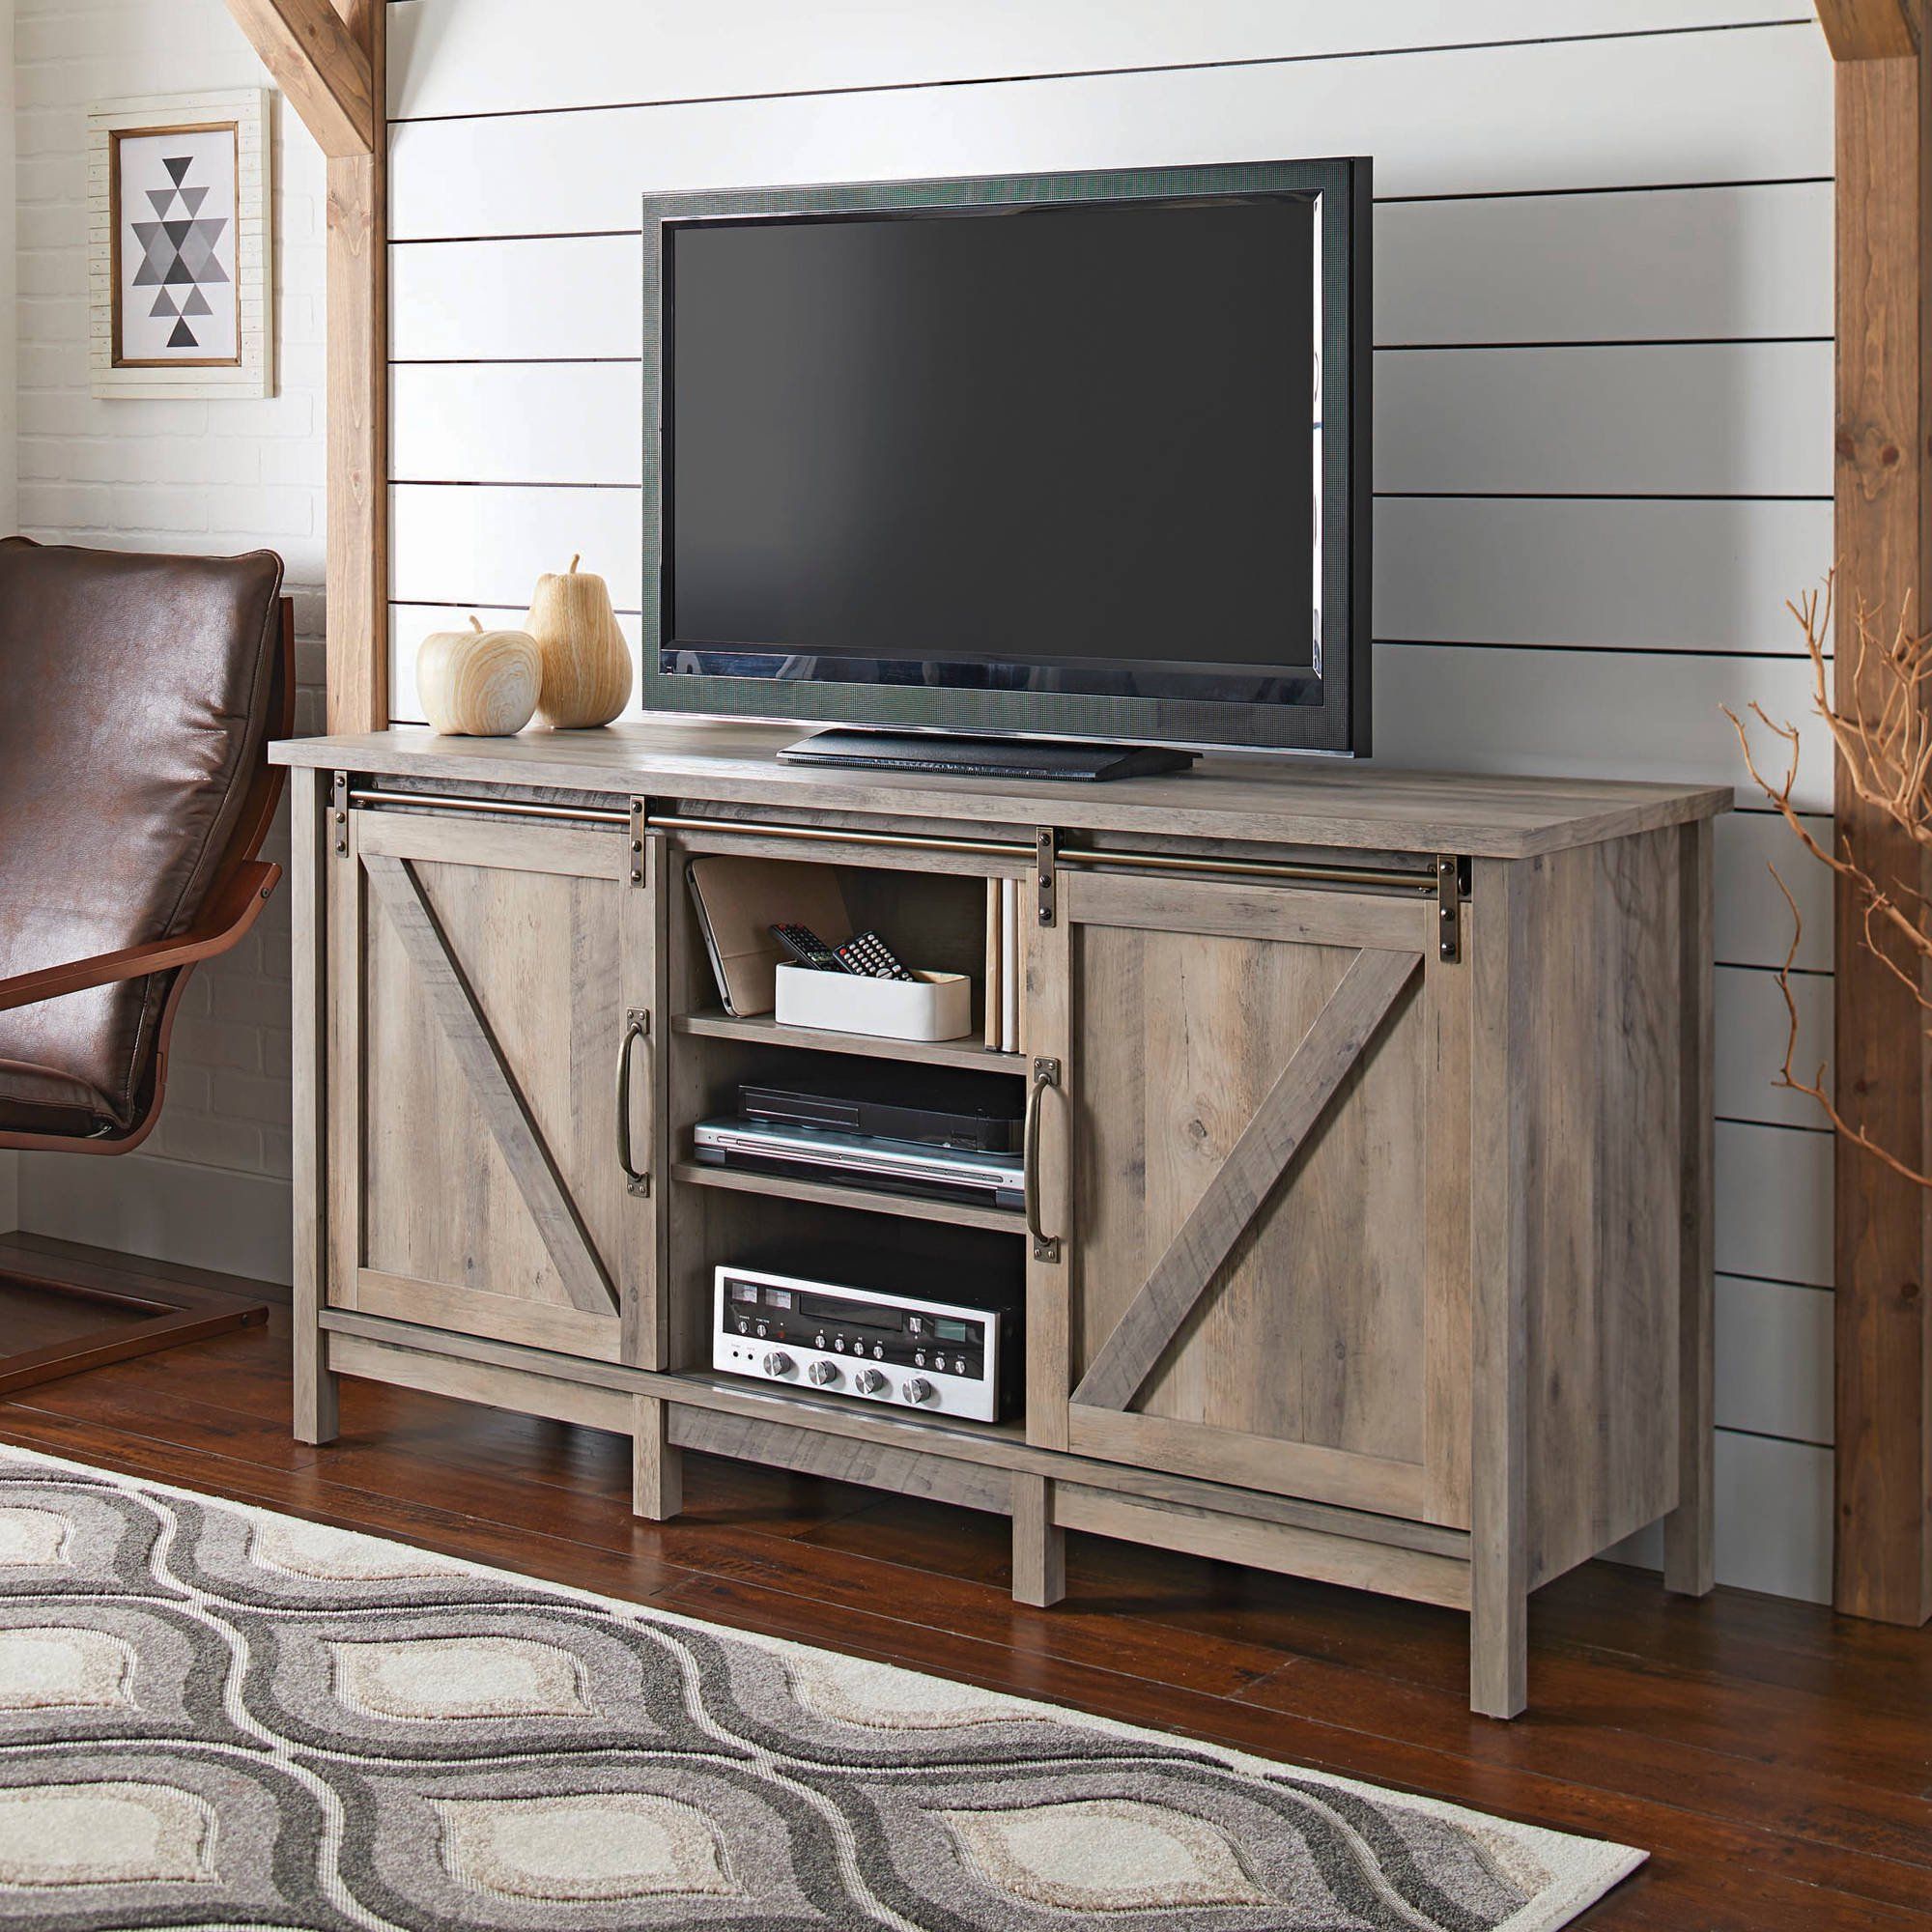 Farmhouse Stand, Rustic Tv Stand, Modern Tv Stand, Modern Farmhouse For Modern Farmhouse Rustic Tv Stands (View 6 of 20)